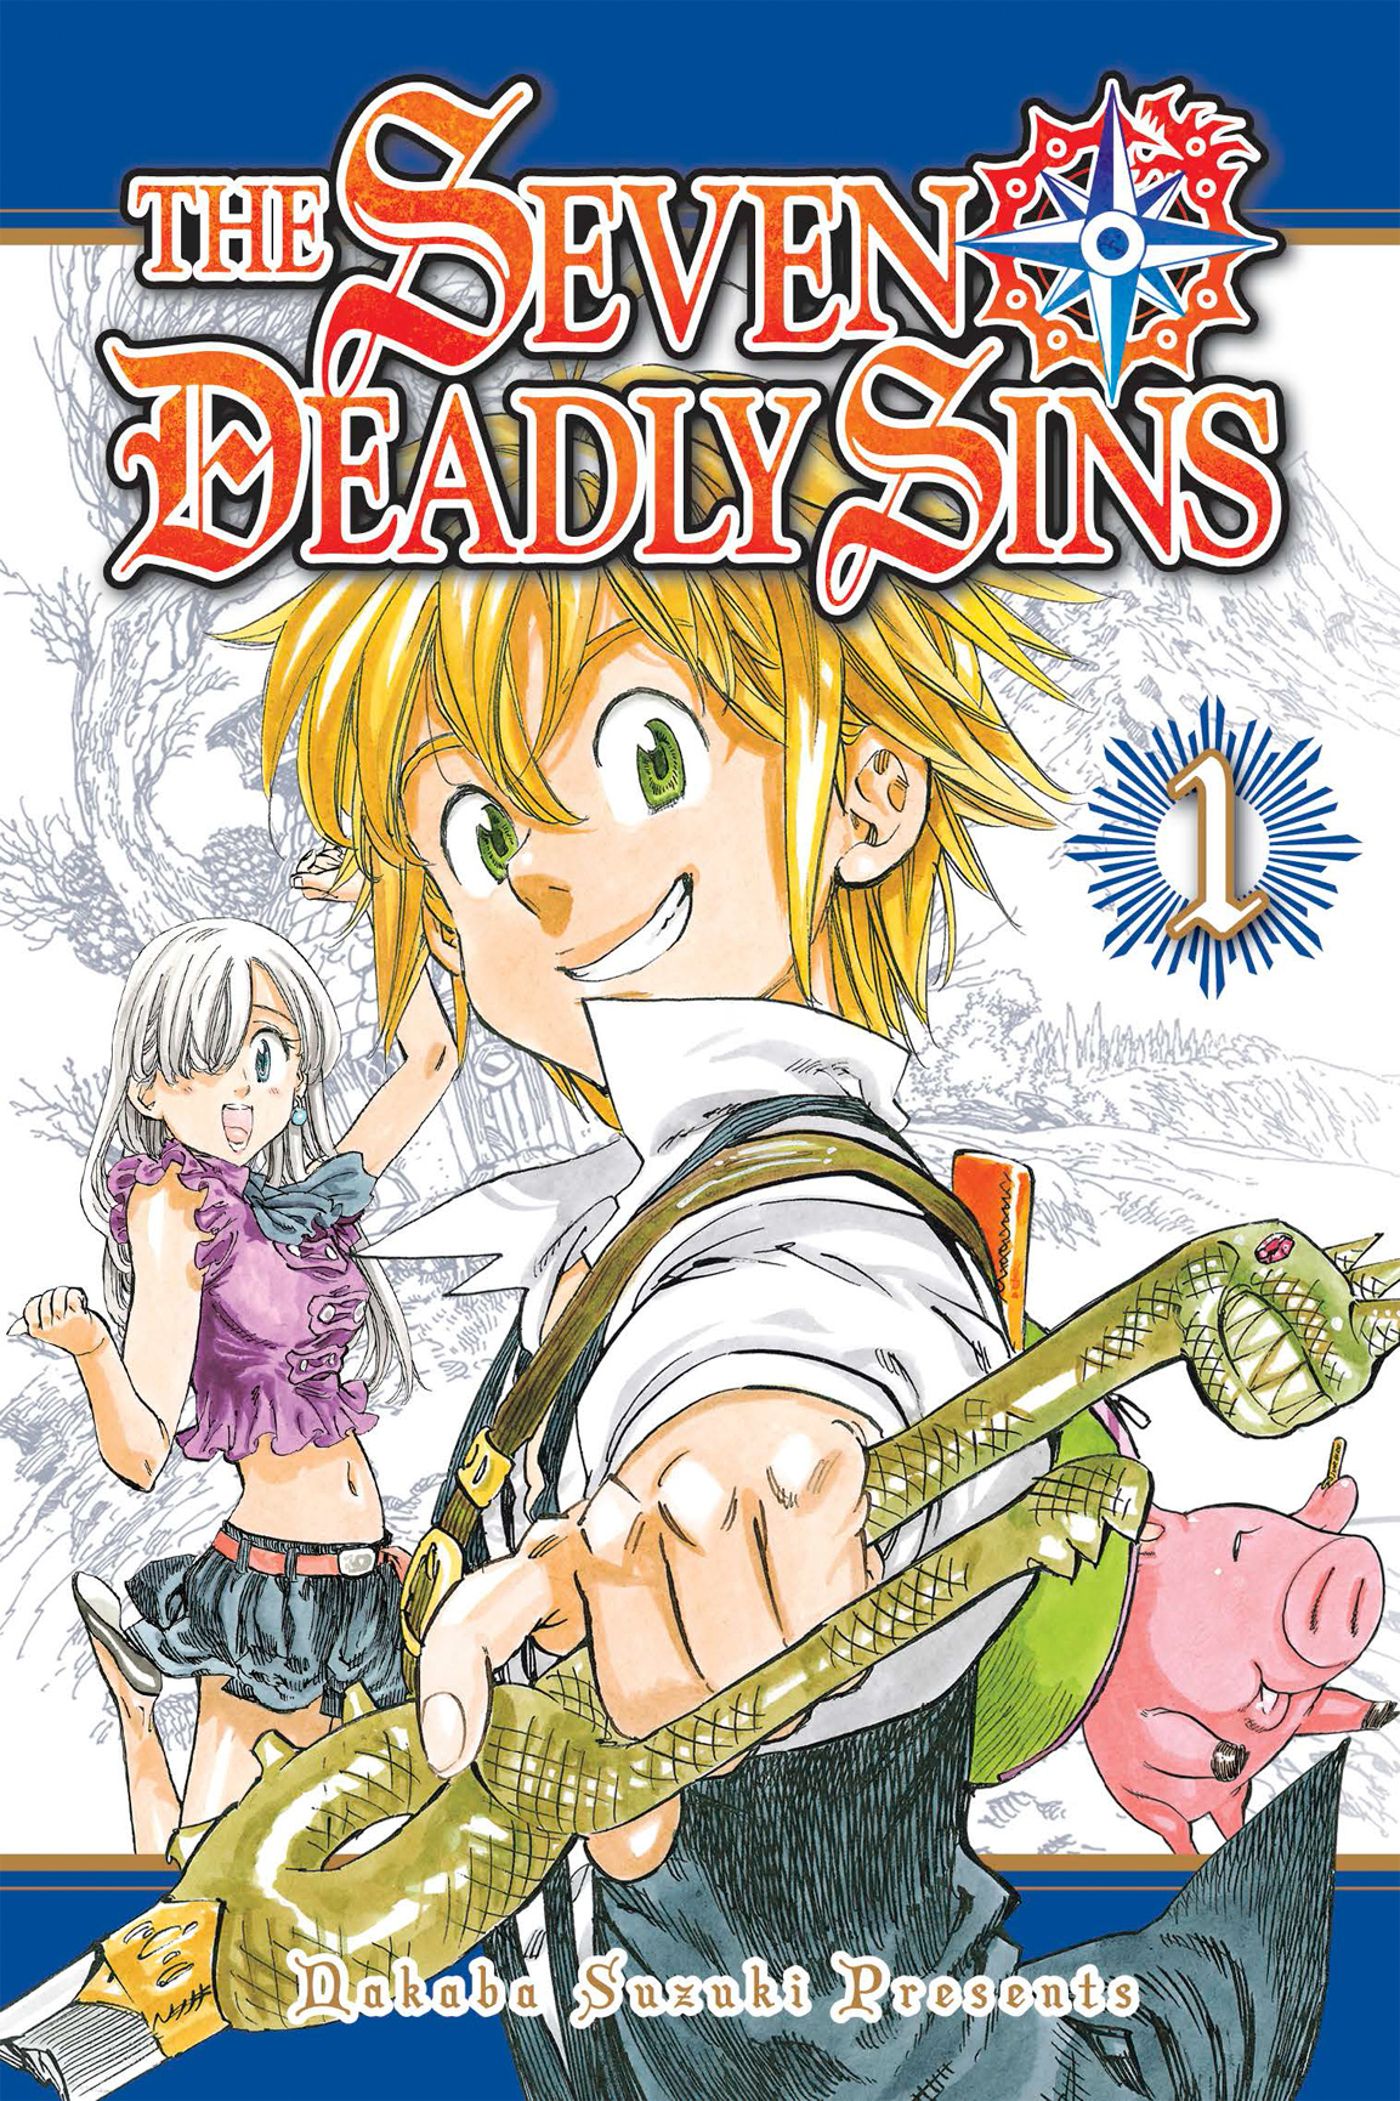 Coverage of The Seven Deadly Sins K MANGA